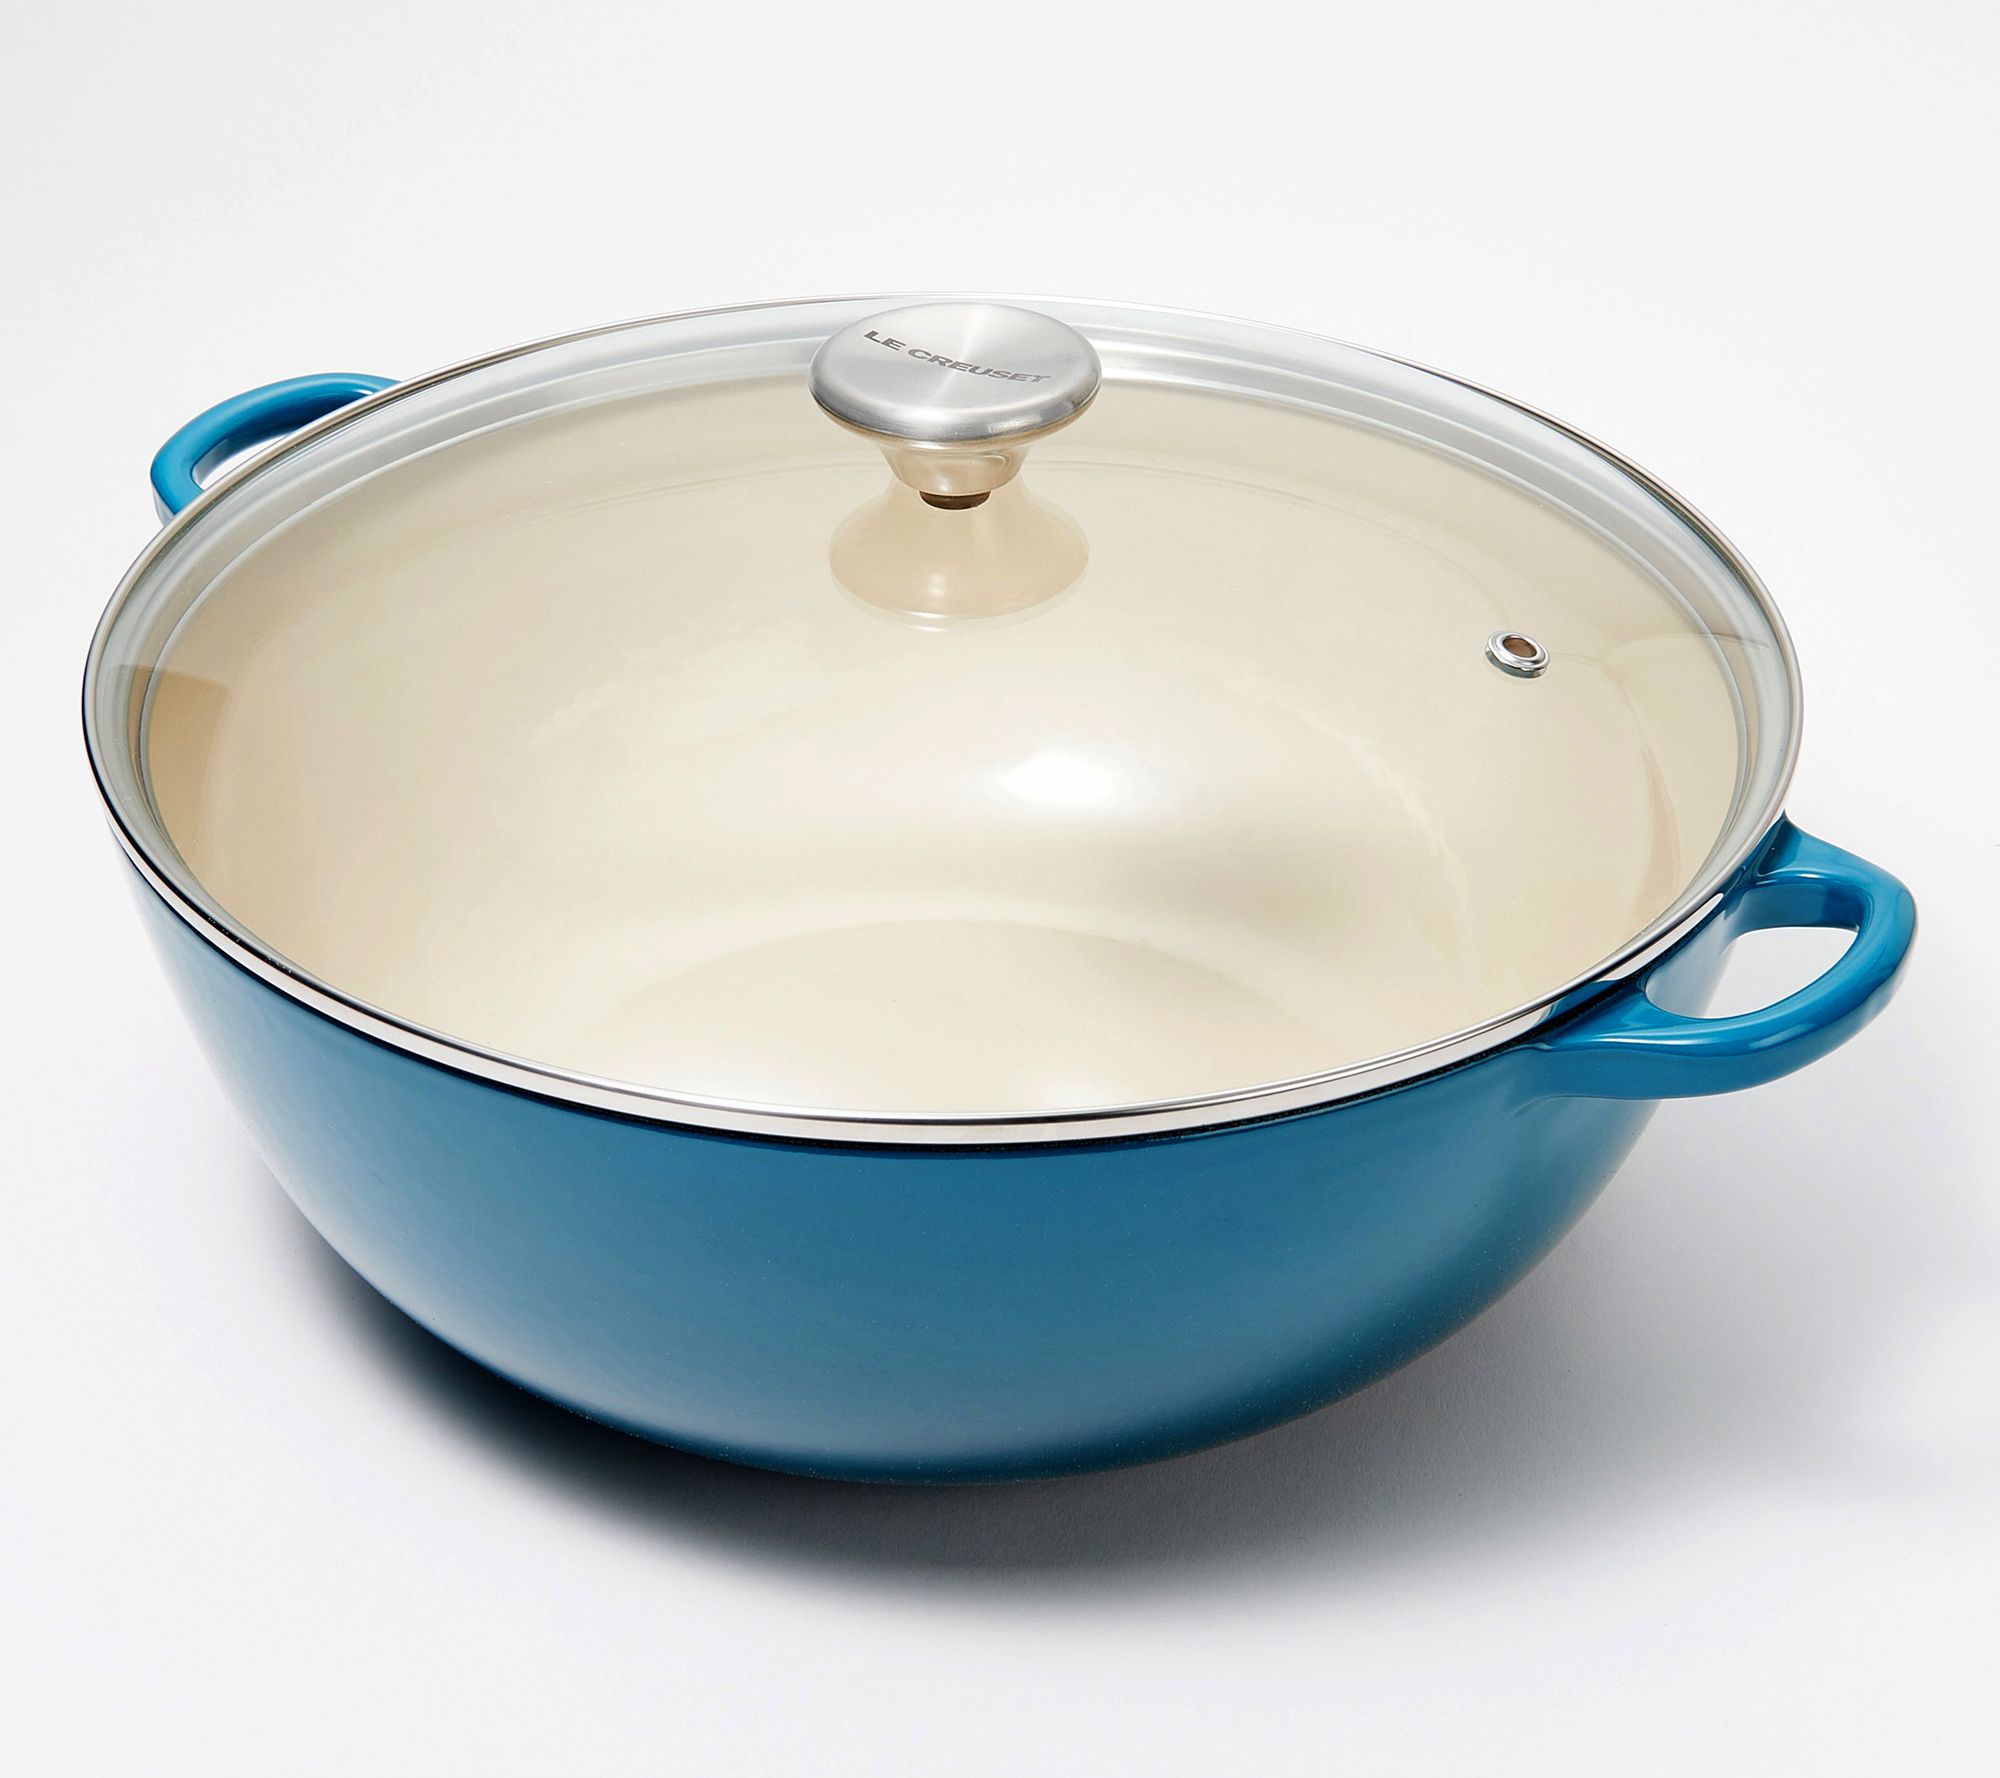 Le Creuset Cast Iron 7.5-qt Classic Chef's Oven with Glass Lid on QVC 